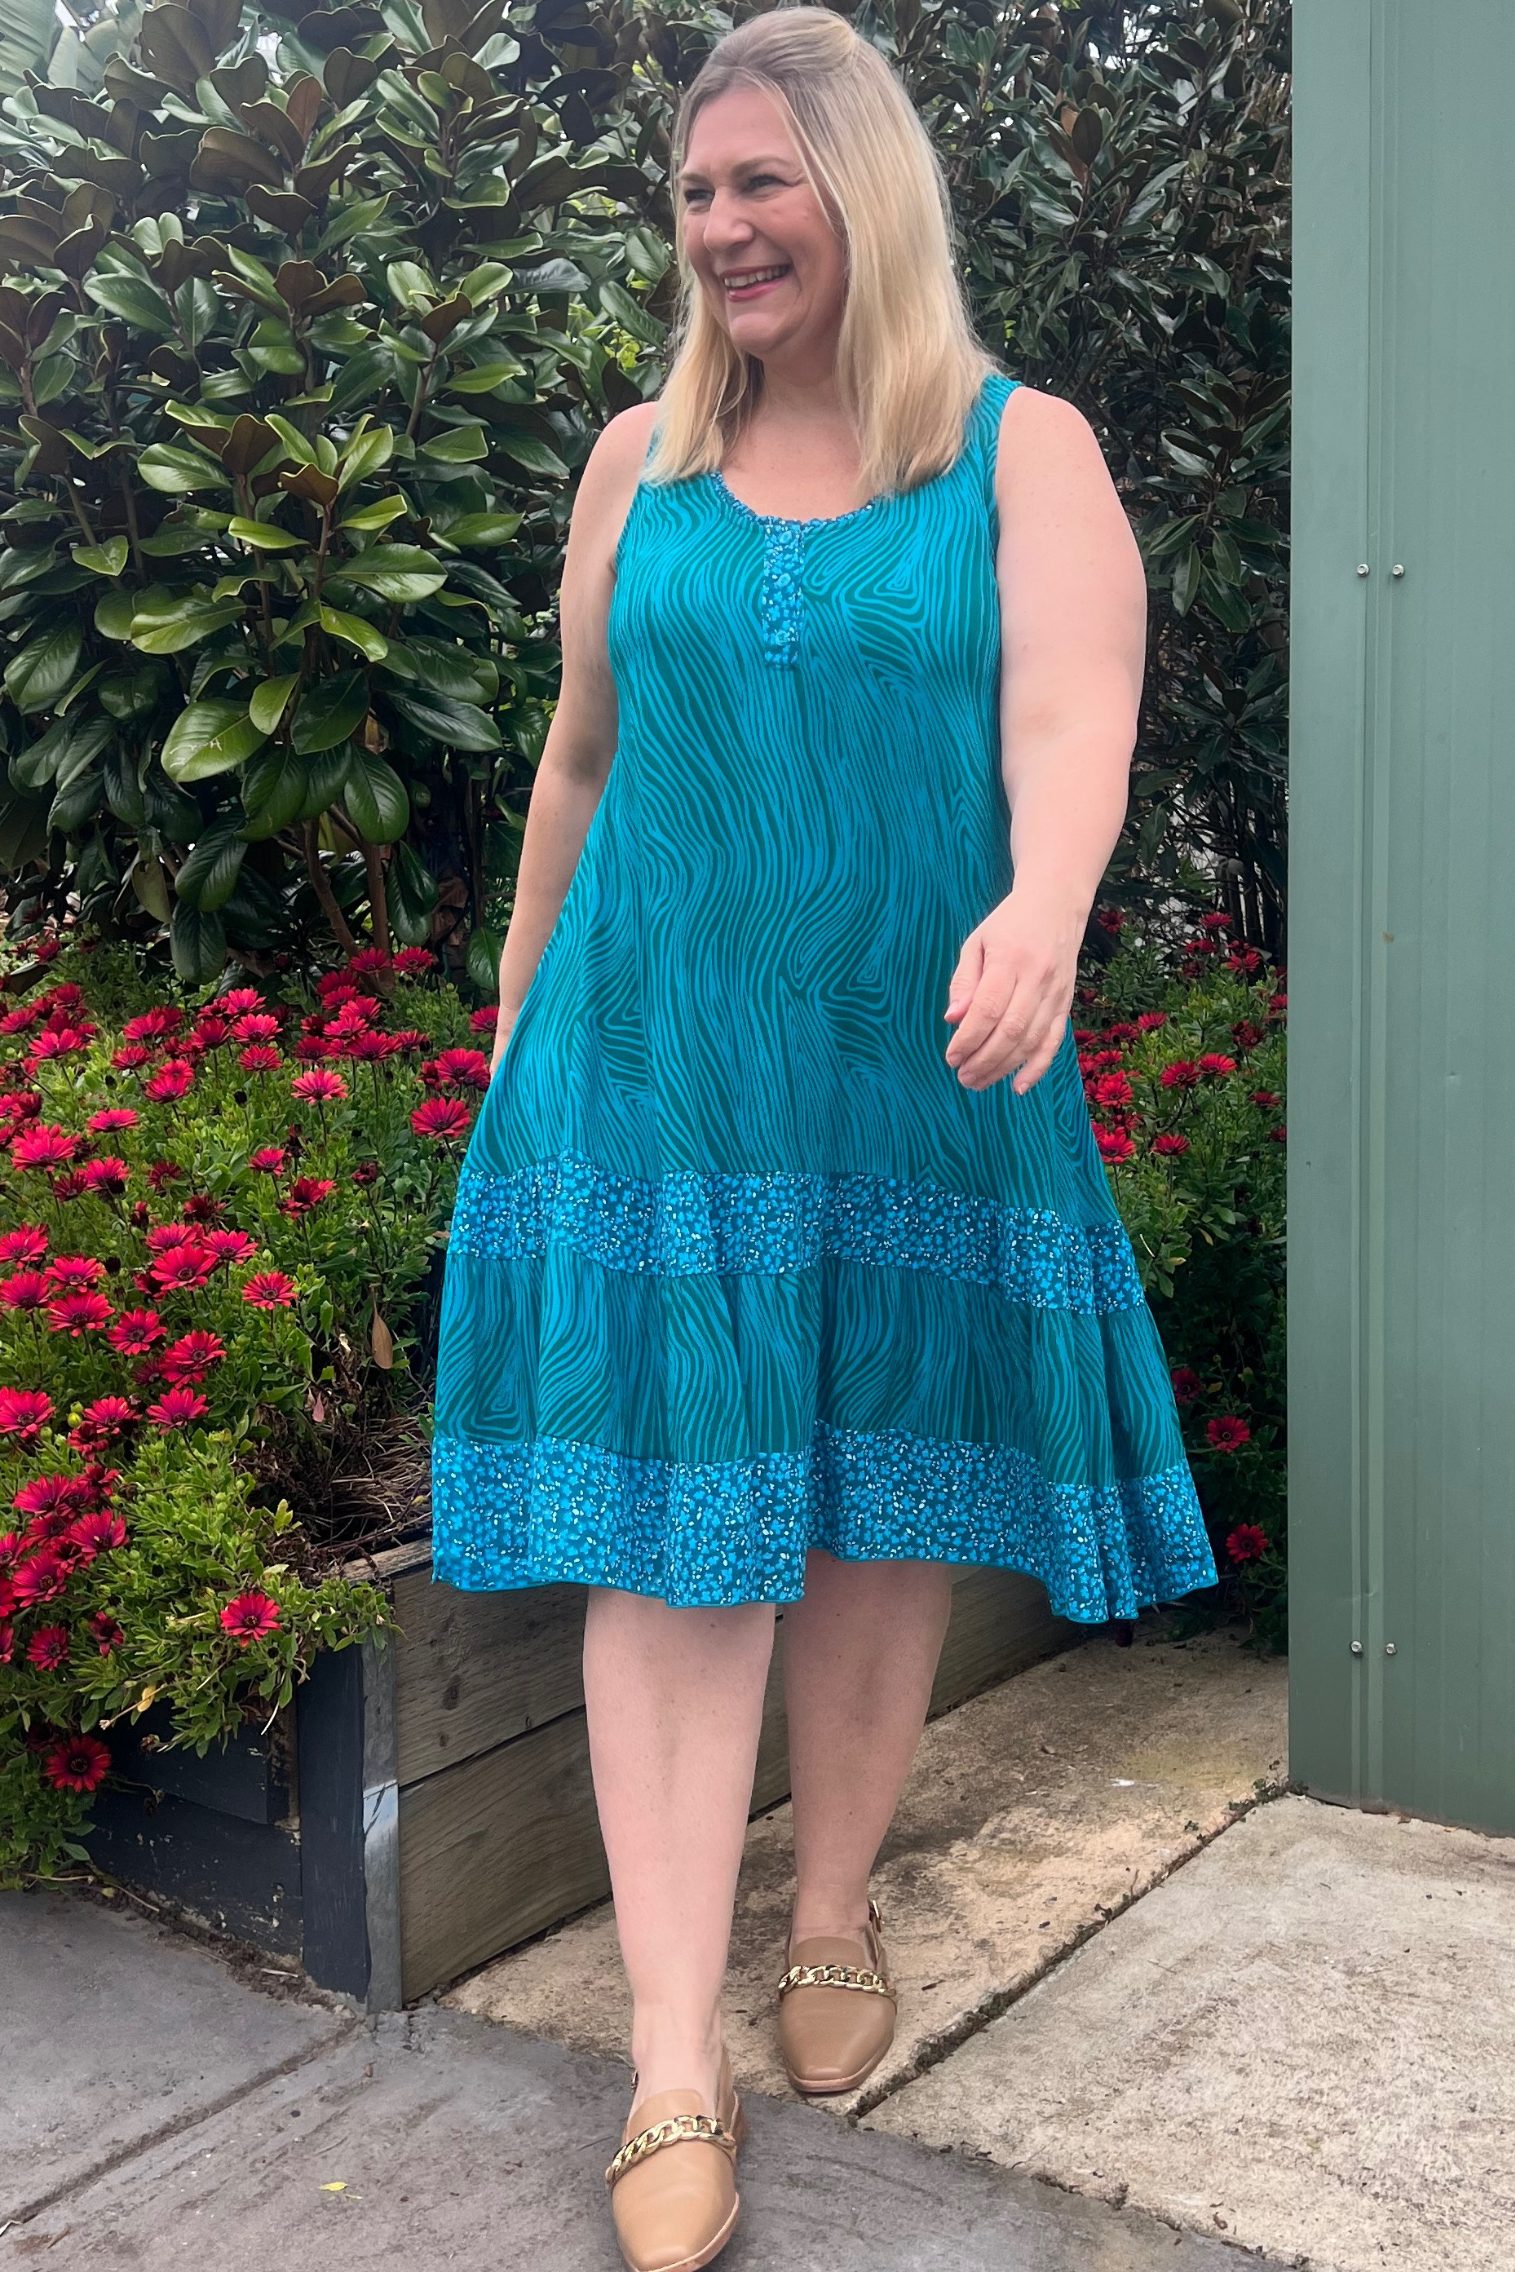 Kita Ku modelling dress Minnie in teal and blue combo printed layer dress , which has no sleeves in a garden setting. 